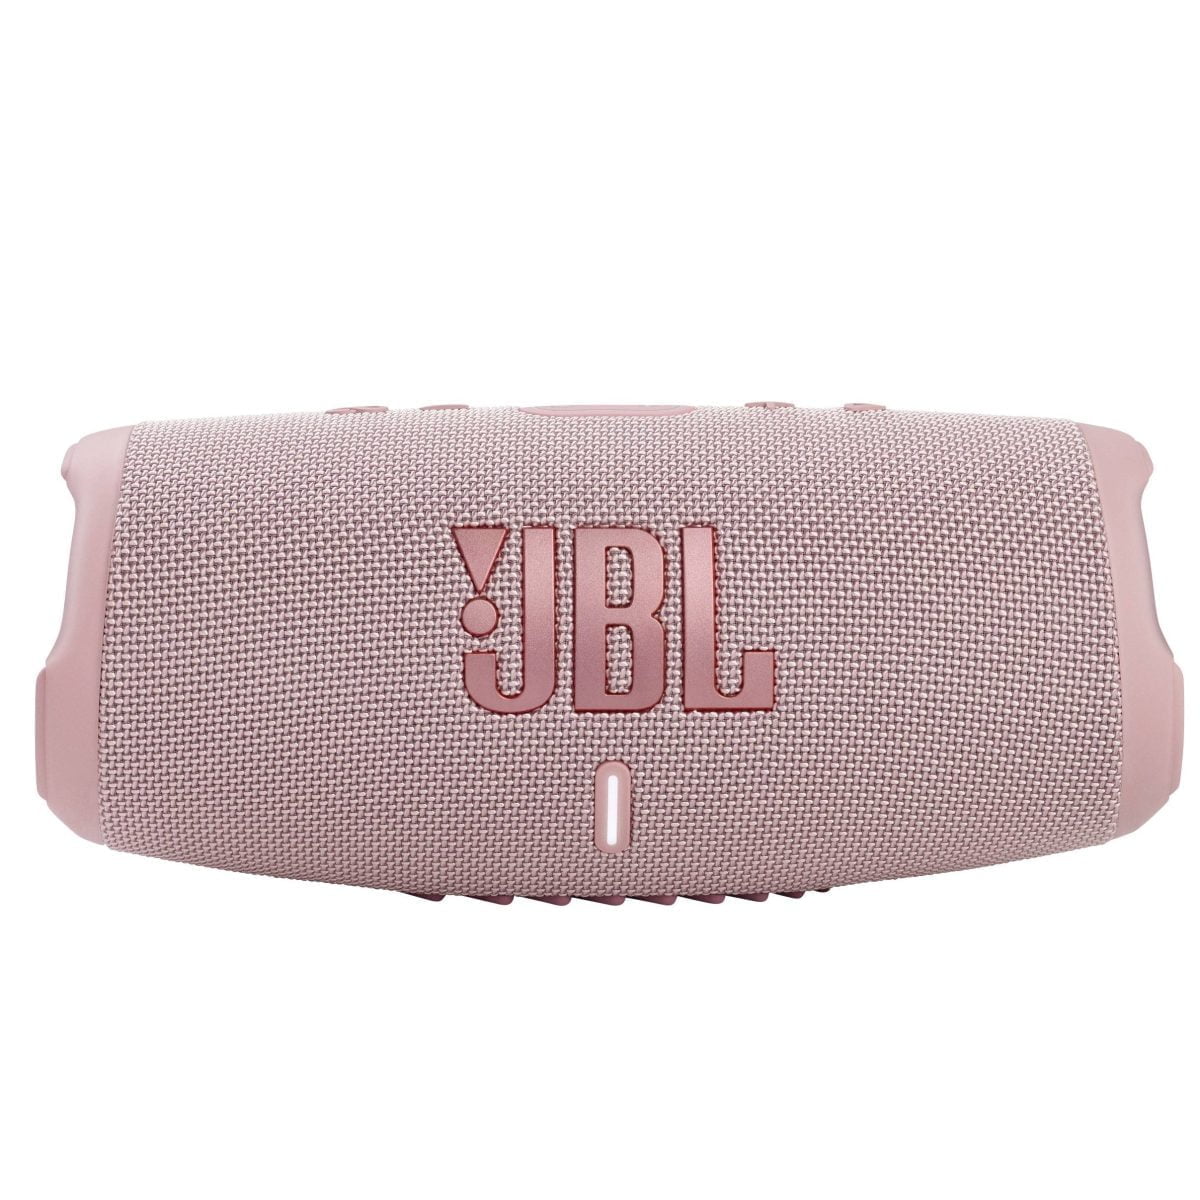 Jbl Charge 5 Portable Bluetooth Speaker With Powerbank Pink Jbl &Lt;H1&Gt;Jbl - Charge5 Portable Waterproof Speaker With Powerbank - Teal&Lt;/H1&Gt; Https://Www.youtube.com/Watch?V=Fn2W7C7Snr8 Play And Charge Endlessly. Take The Party With You No Matter What The Weather. The Jbl Charge 5 Speaker Delivers Bold Jbl Original Pro Sound, With Its Optimized Long Excursion Driver, Separate Tweeter And Dual Pumping Jbl Bass Radiators. Up To 20 Hours Of Playtime And A Handy Powerbank To Keep Your Devices Charged To Keep The Party Going All Night. Rain? Spilled Drinks? Beach Sand? The Ip67 Waterproof And Dustproof Charge 5 Survives Whatever Comes Its Way. Thanks To Partyboost, You Can Connect Multiple Jbl Partyboost-Enabled Speakers For A Sound Big Enough For Any Crowd. With All-New Colors Inspired By The Latest Street Fashion Trends, It Looks As Great As It Sounds. Jbl Speaker Jbl Charge5 Portable Waterproof Speaker With Powerbank - Pink